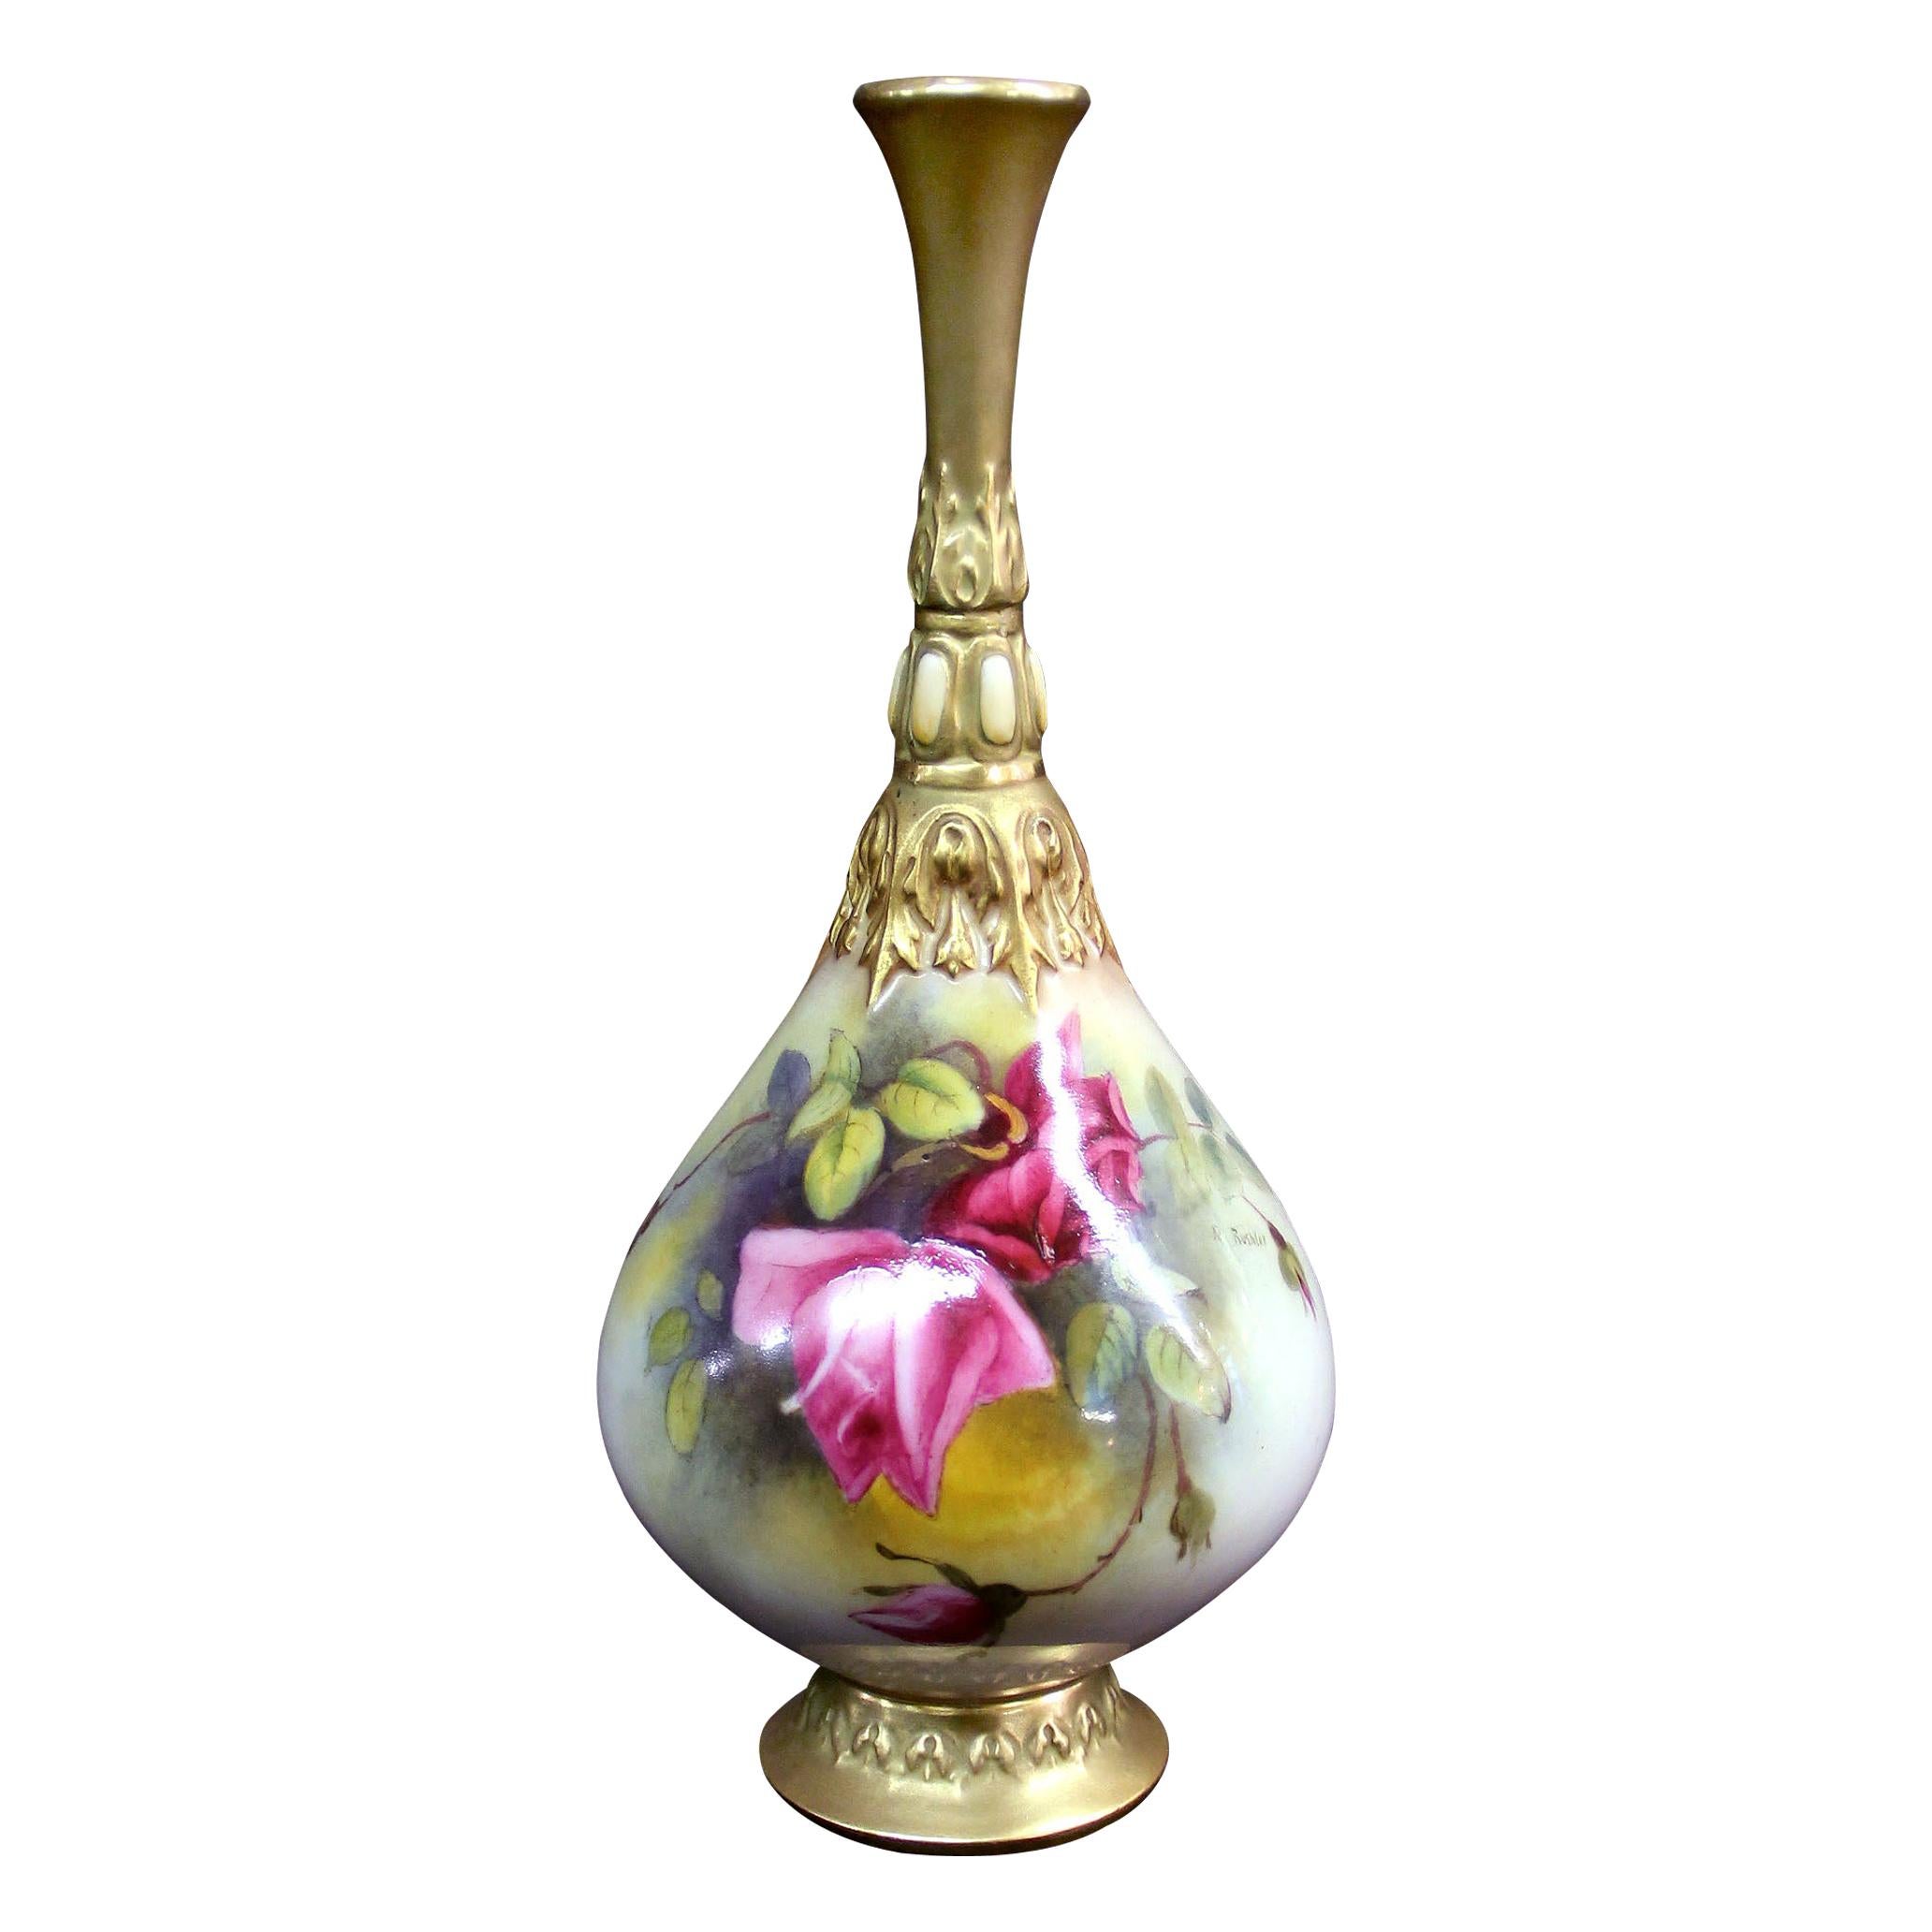 Beautiful Late 19th Century Hand Painted Royal Worcester Porcelain Flower Vase